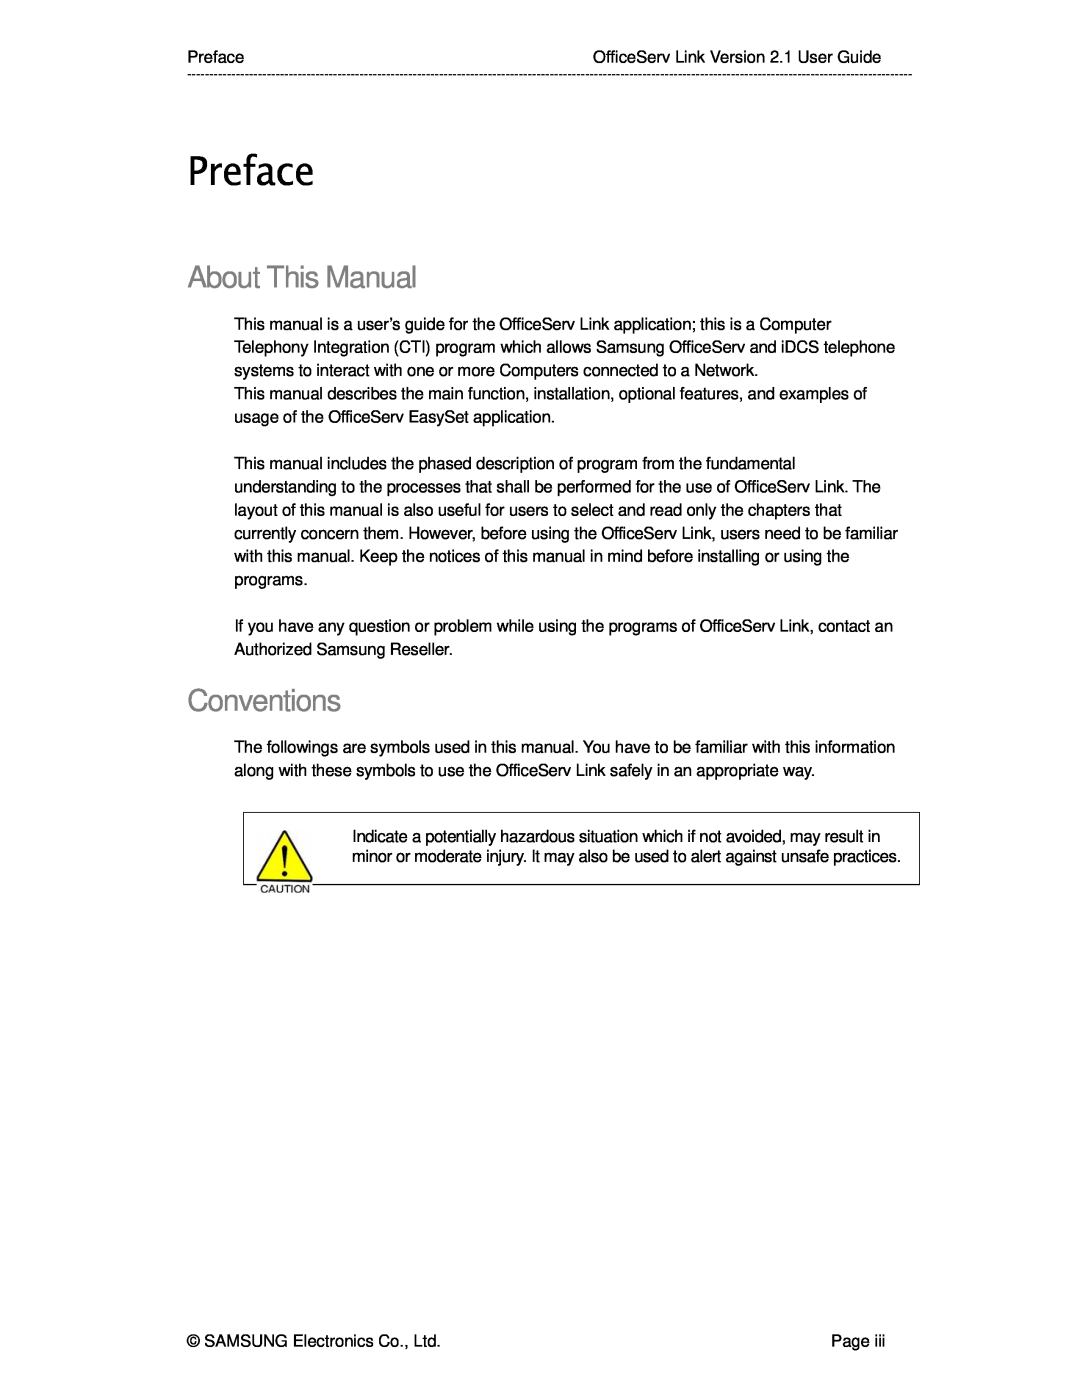 Samsung Version 2.1 manual Preface, About This Manual, Conventions 